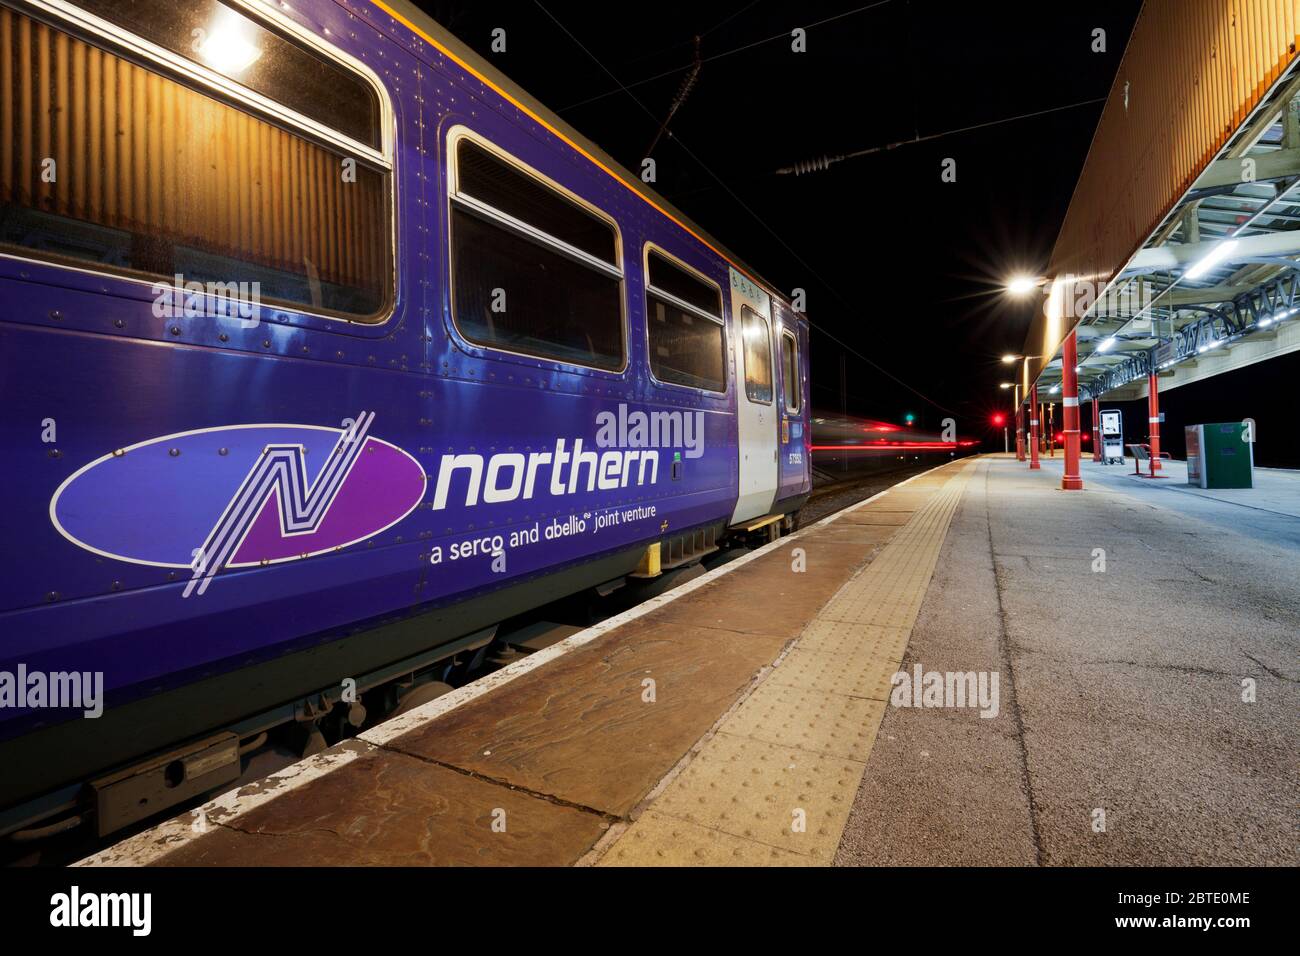 Serco Abellio Northern Rail logo on a class 153 single carriage train with light trails from another departing train. Stock Photo